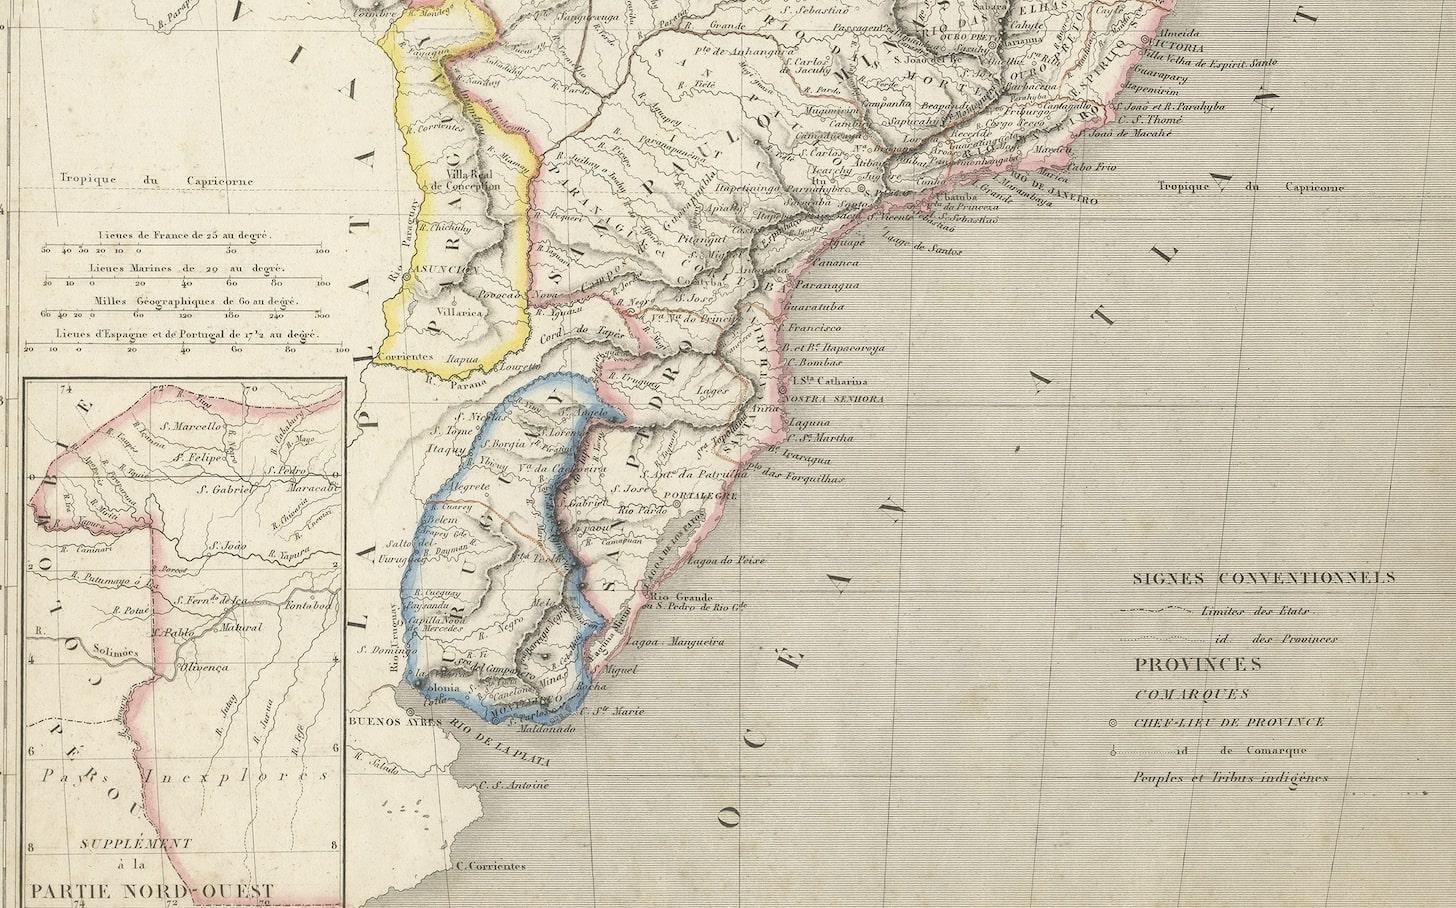 map of paraguay and uruguay